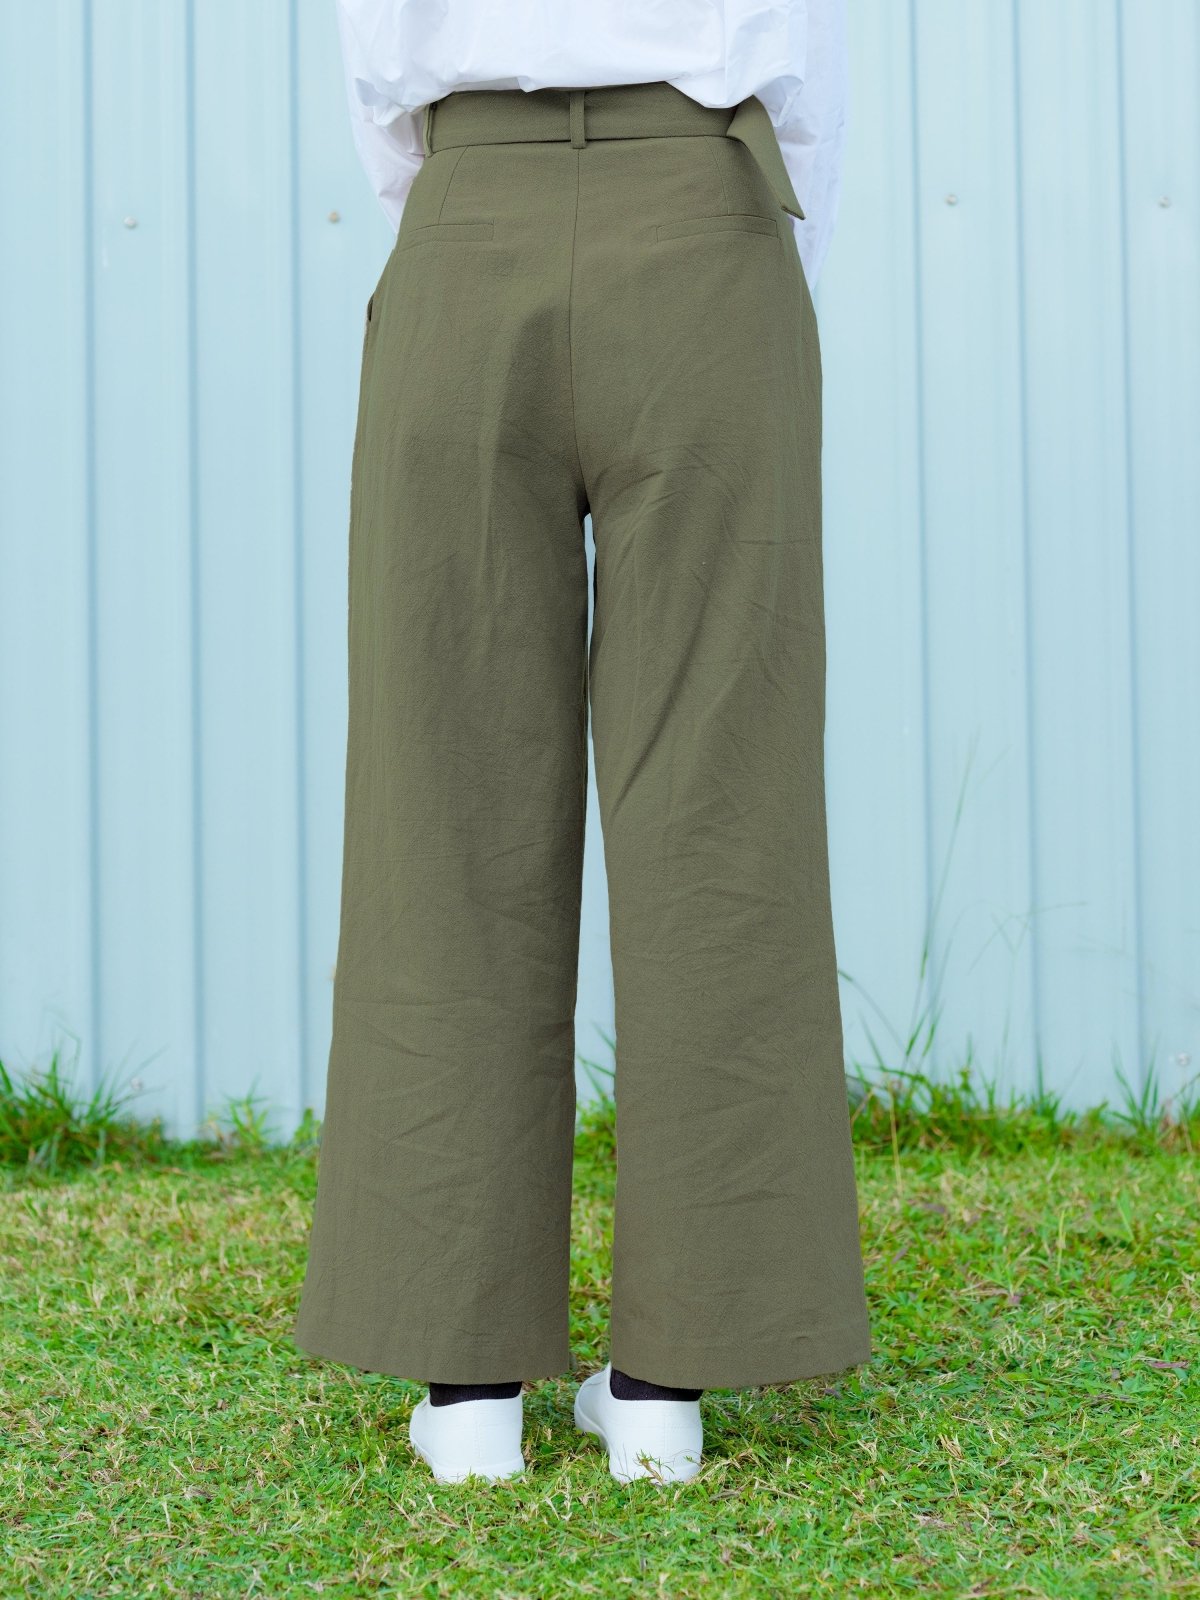 Belted Wide Leg Pants FOREST - DAG-DD8811-21ForestS - Matcha Green - S - D'ZAGE Designs